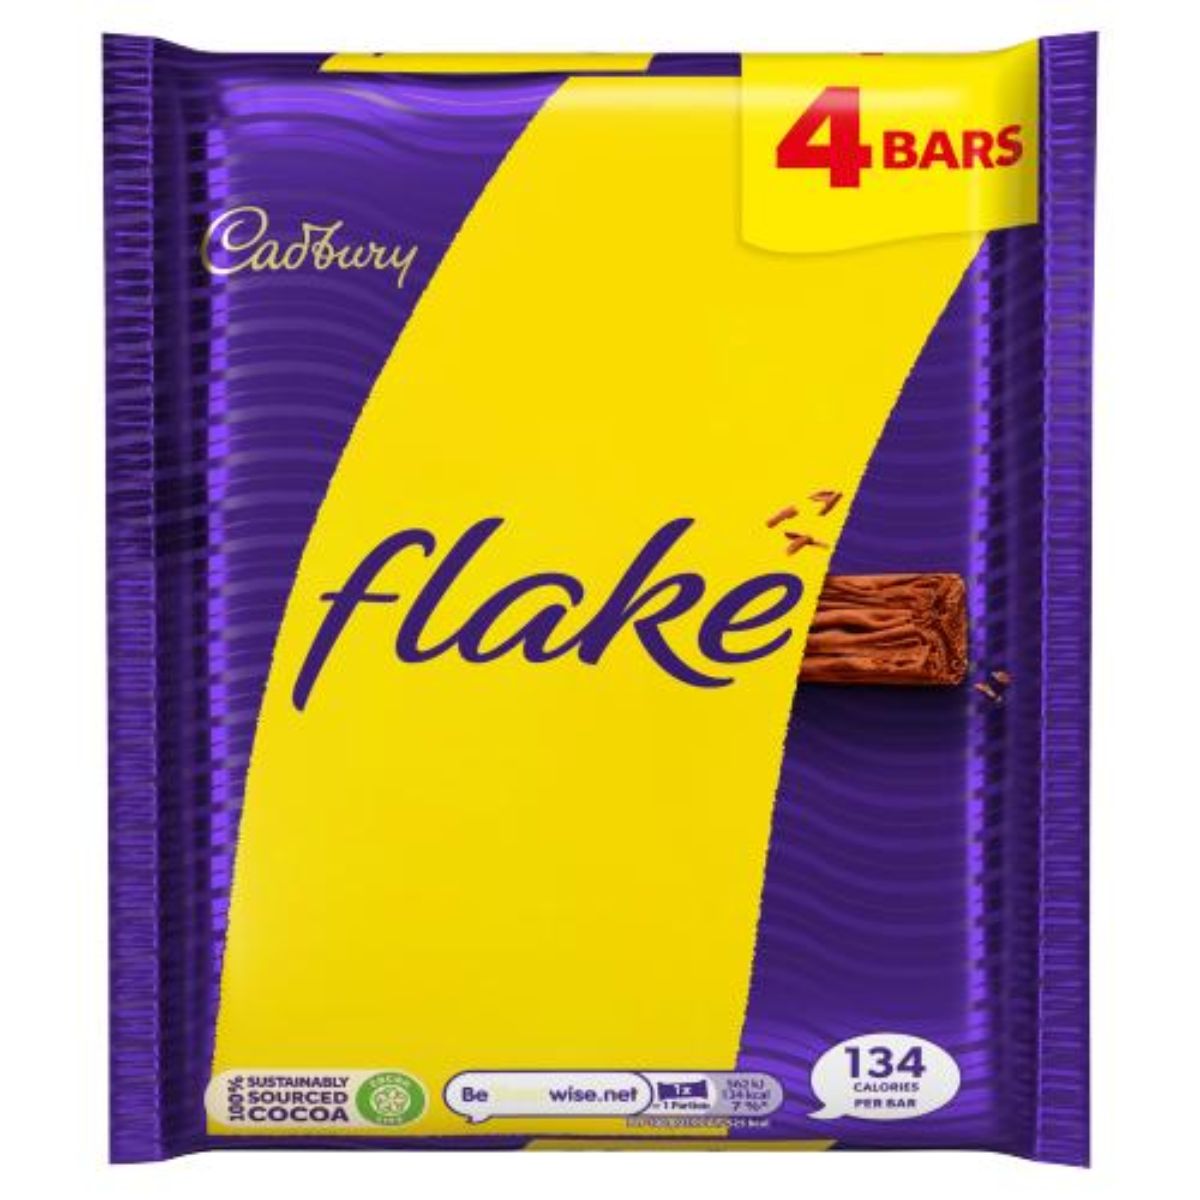 Packaging of Cadbury Flake 4 x 25.5g chocolate bars, displaying 4 bars with a prominent yellow and purple color scheme.